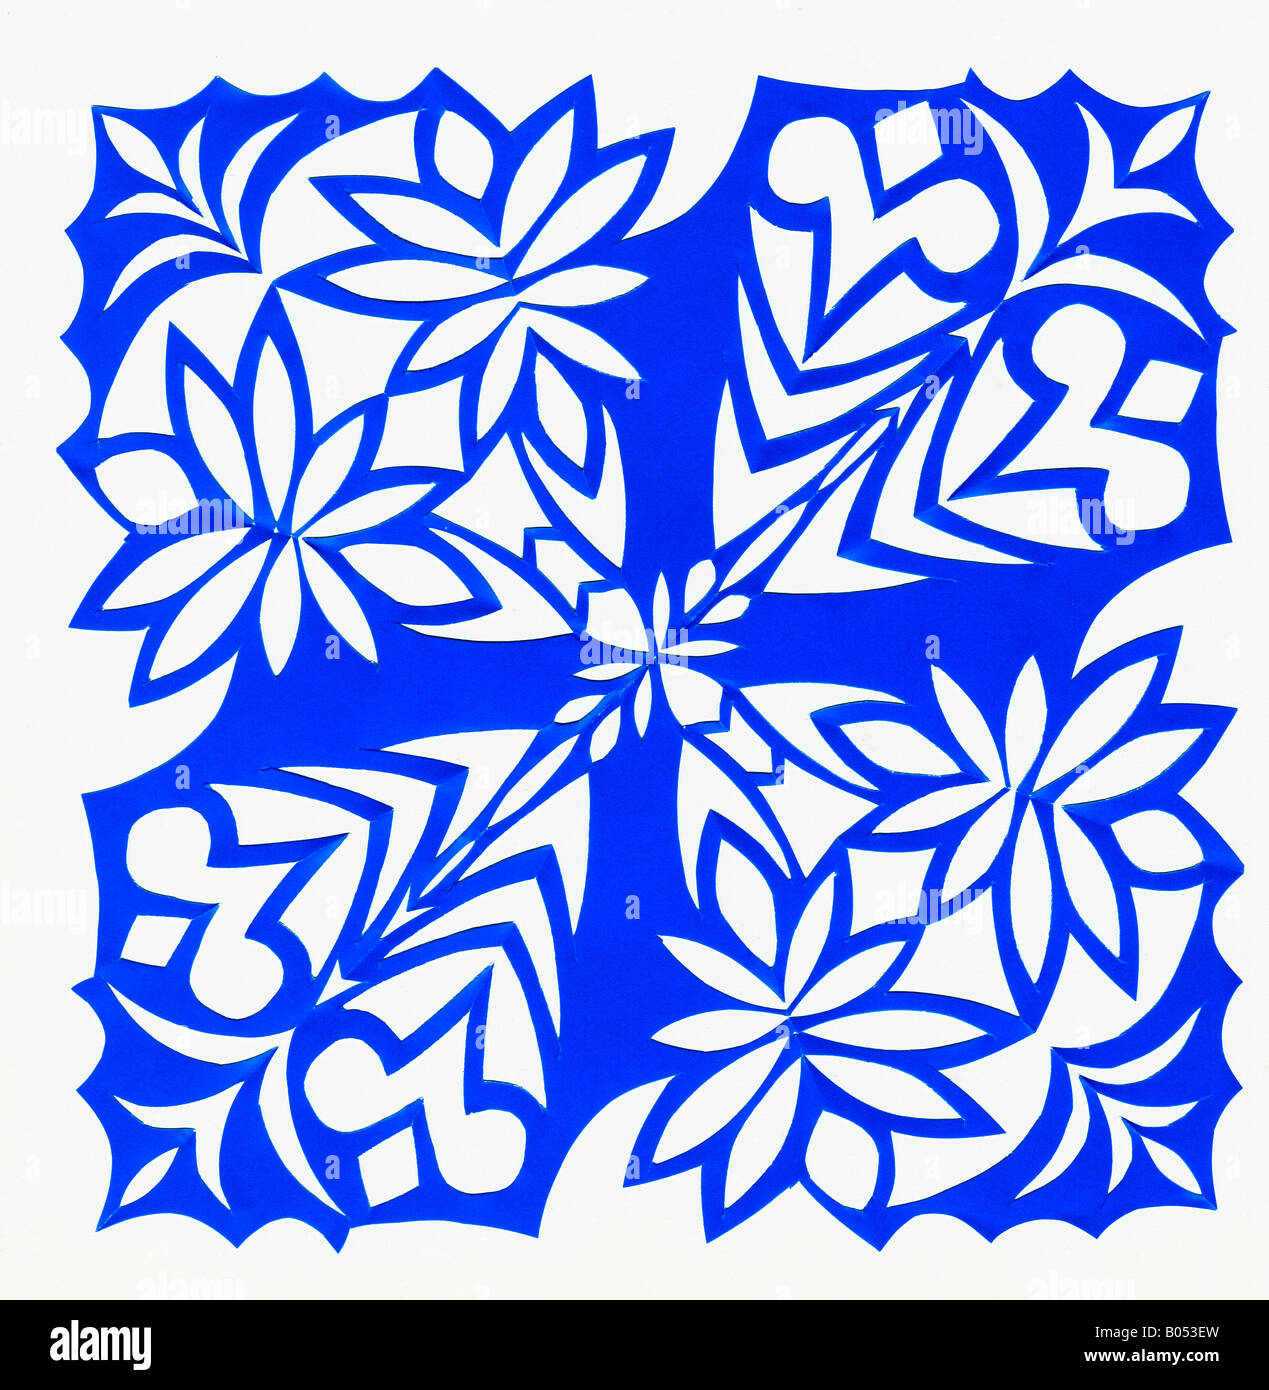 Contemporary paper cutting with symmetrical floral design by Miss Wanda Skowron from Warszawa Poland 2008 Stock Photo